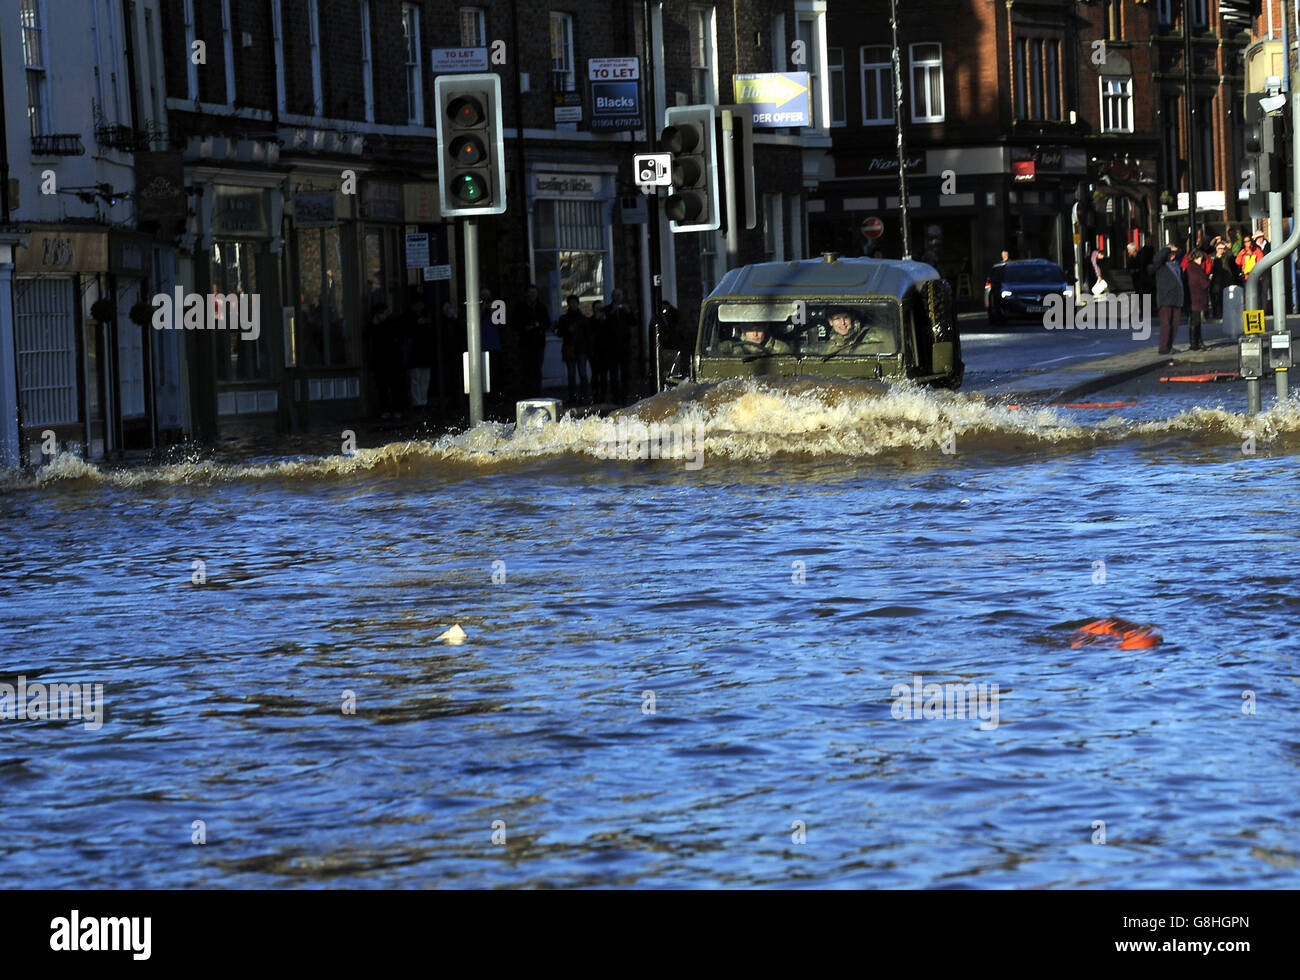 An Army Land Rover is driven through floodwater in York city centre after the River Ouse bursts its banks. Stock Photo